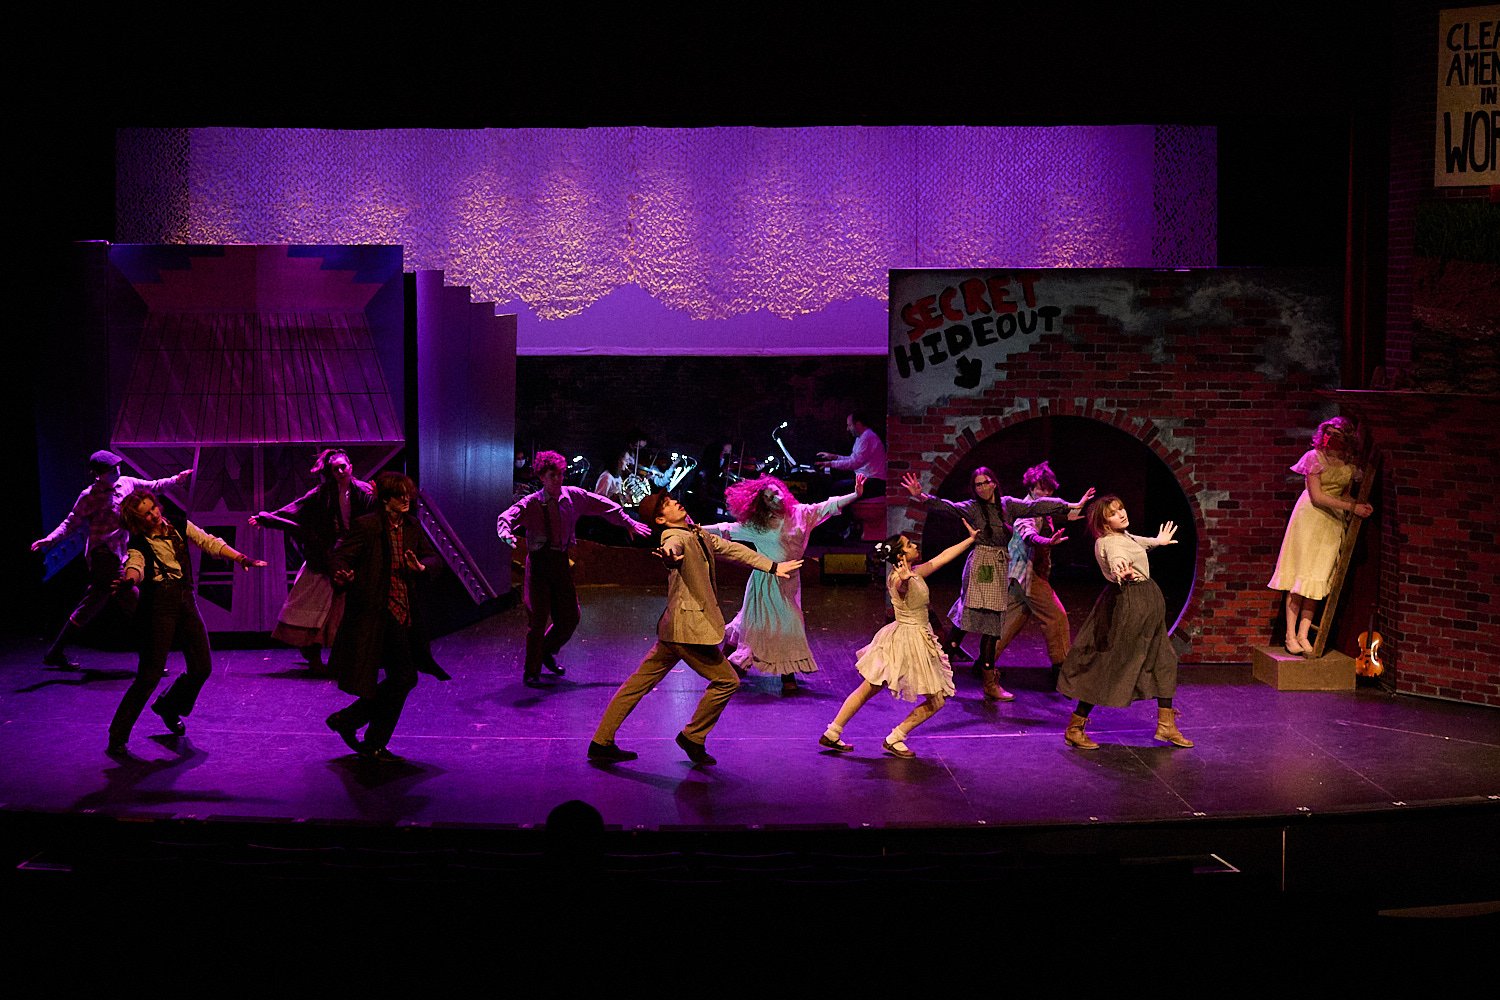  SEWICKLEY, PA, USA - MARCH 2ND 2022: High School students of Sewickley Academy are performing in an annual musical show “Urinetown” running on March 3rd-5th 2022. Shivali Saxena 